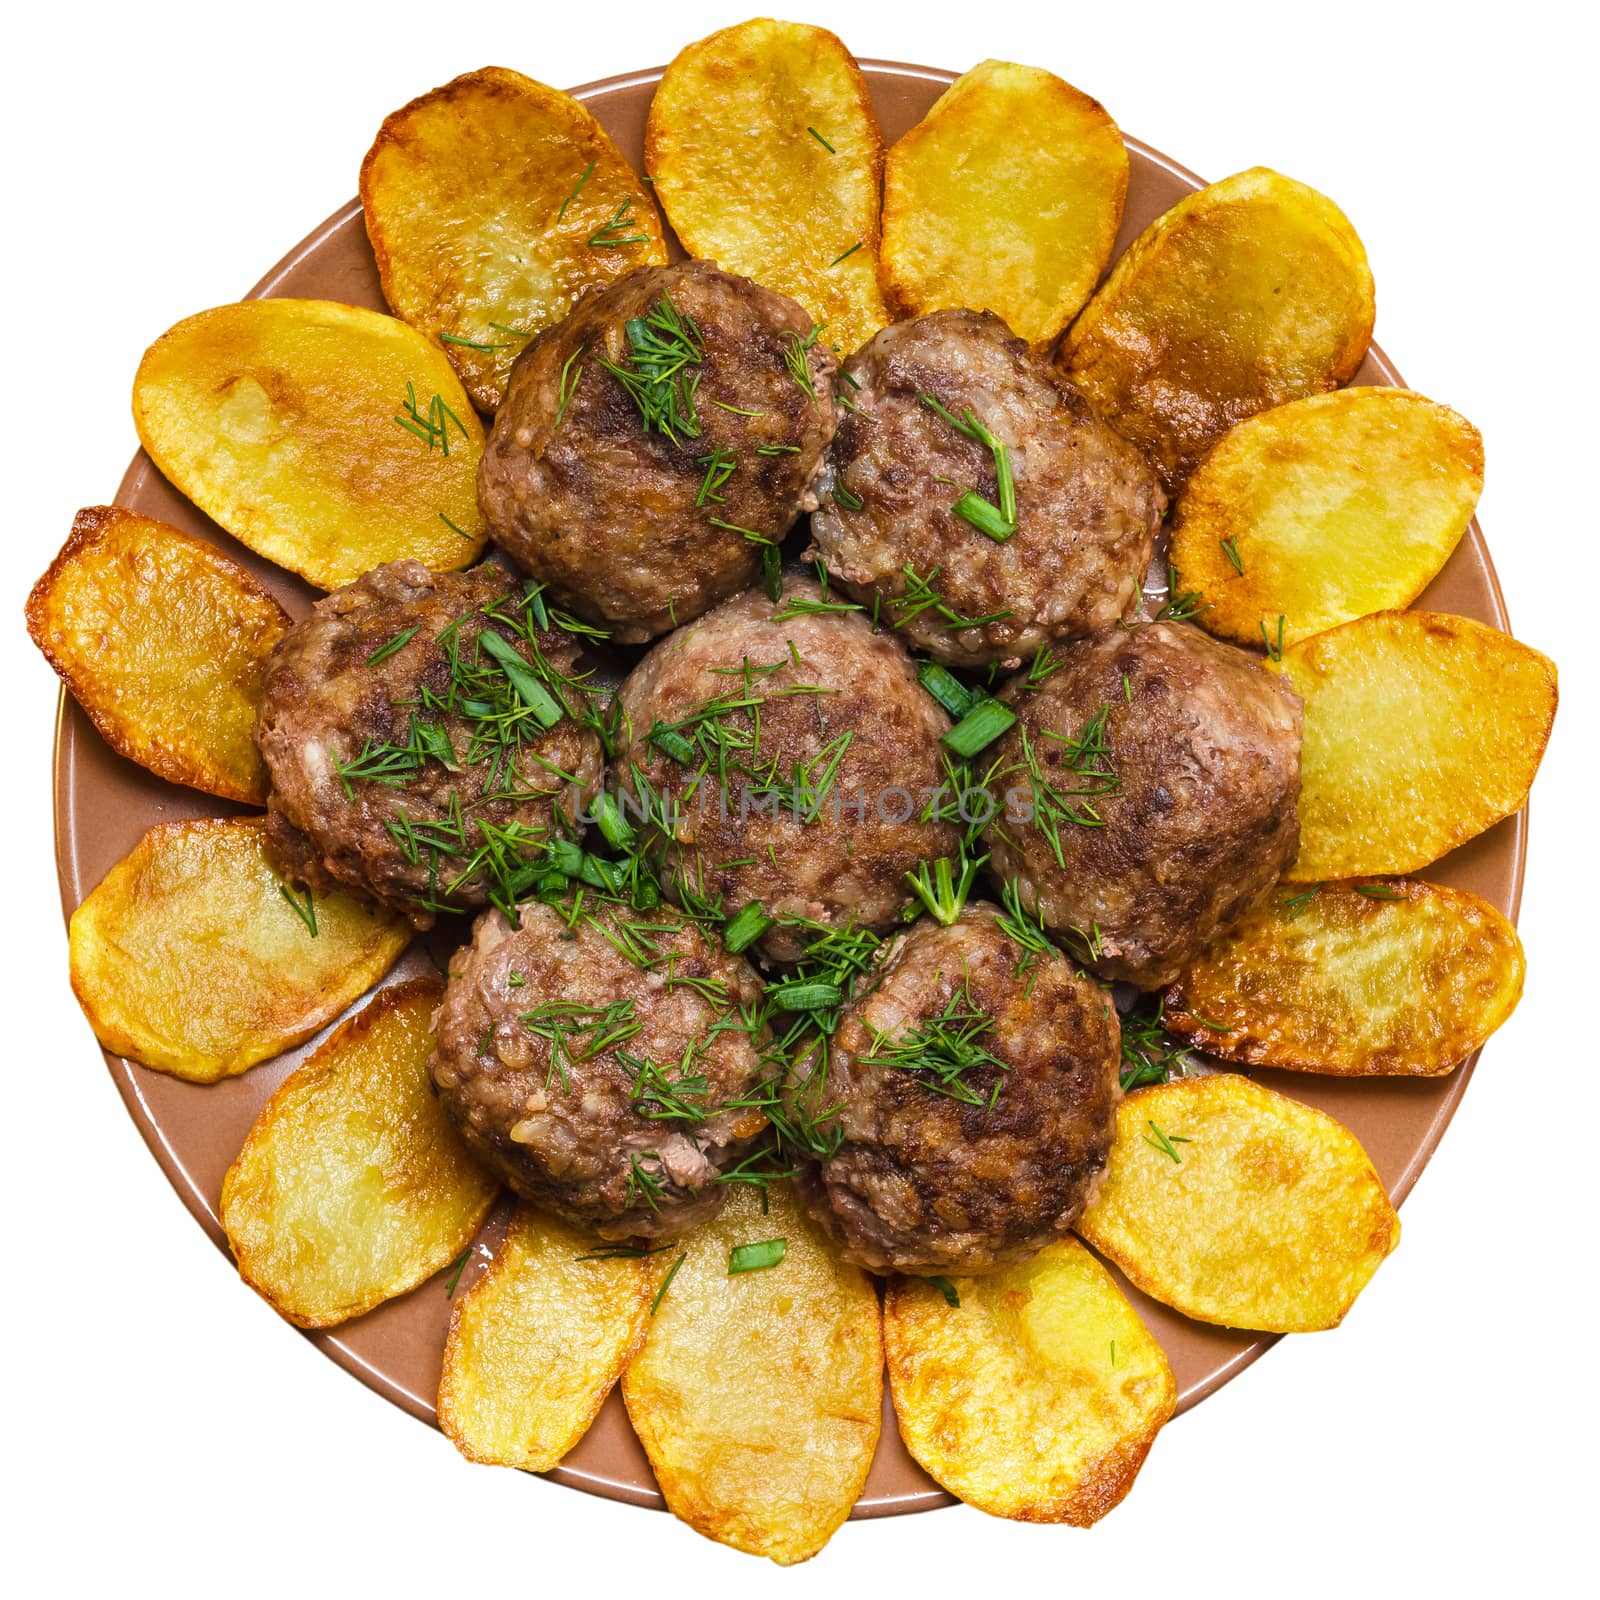 Fried meatballs with rice and French fries by Gaina